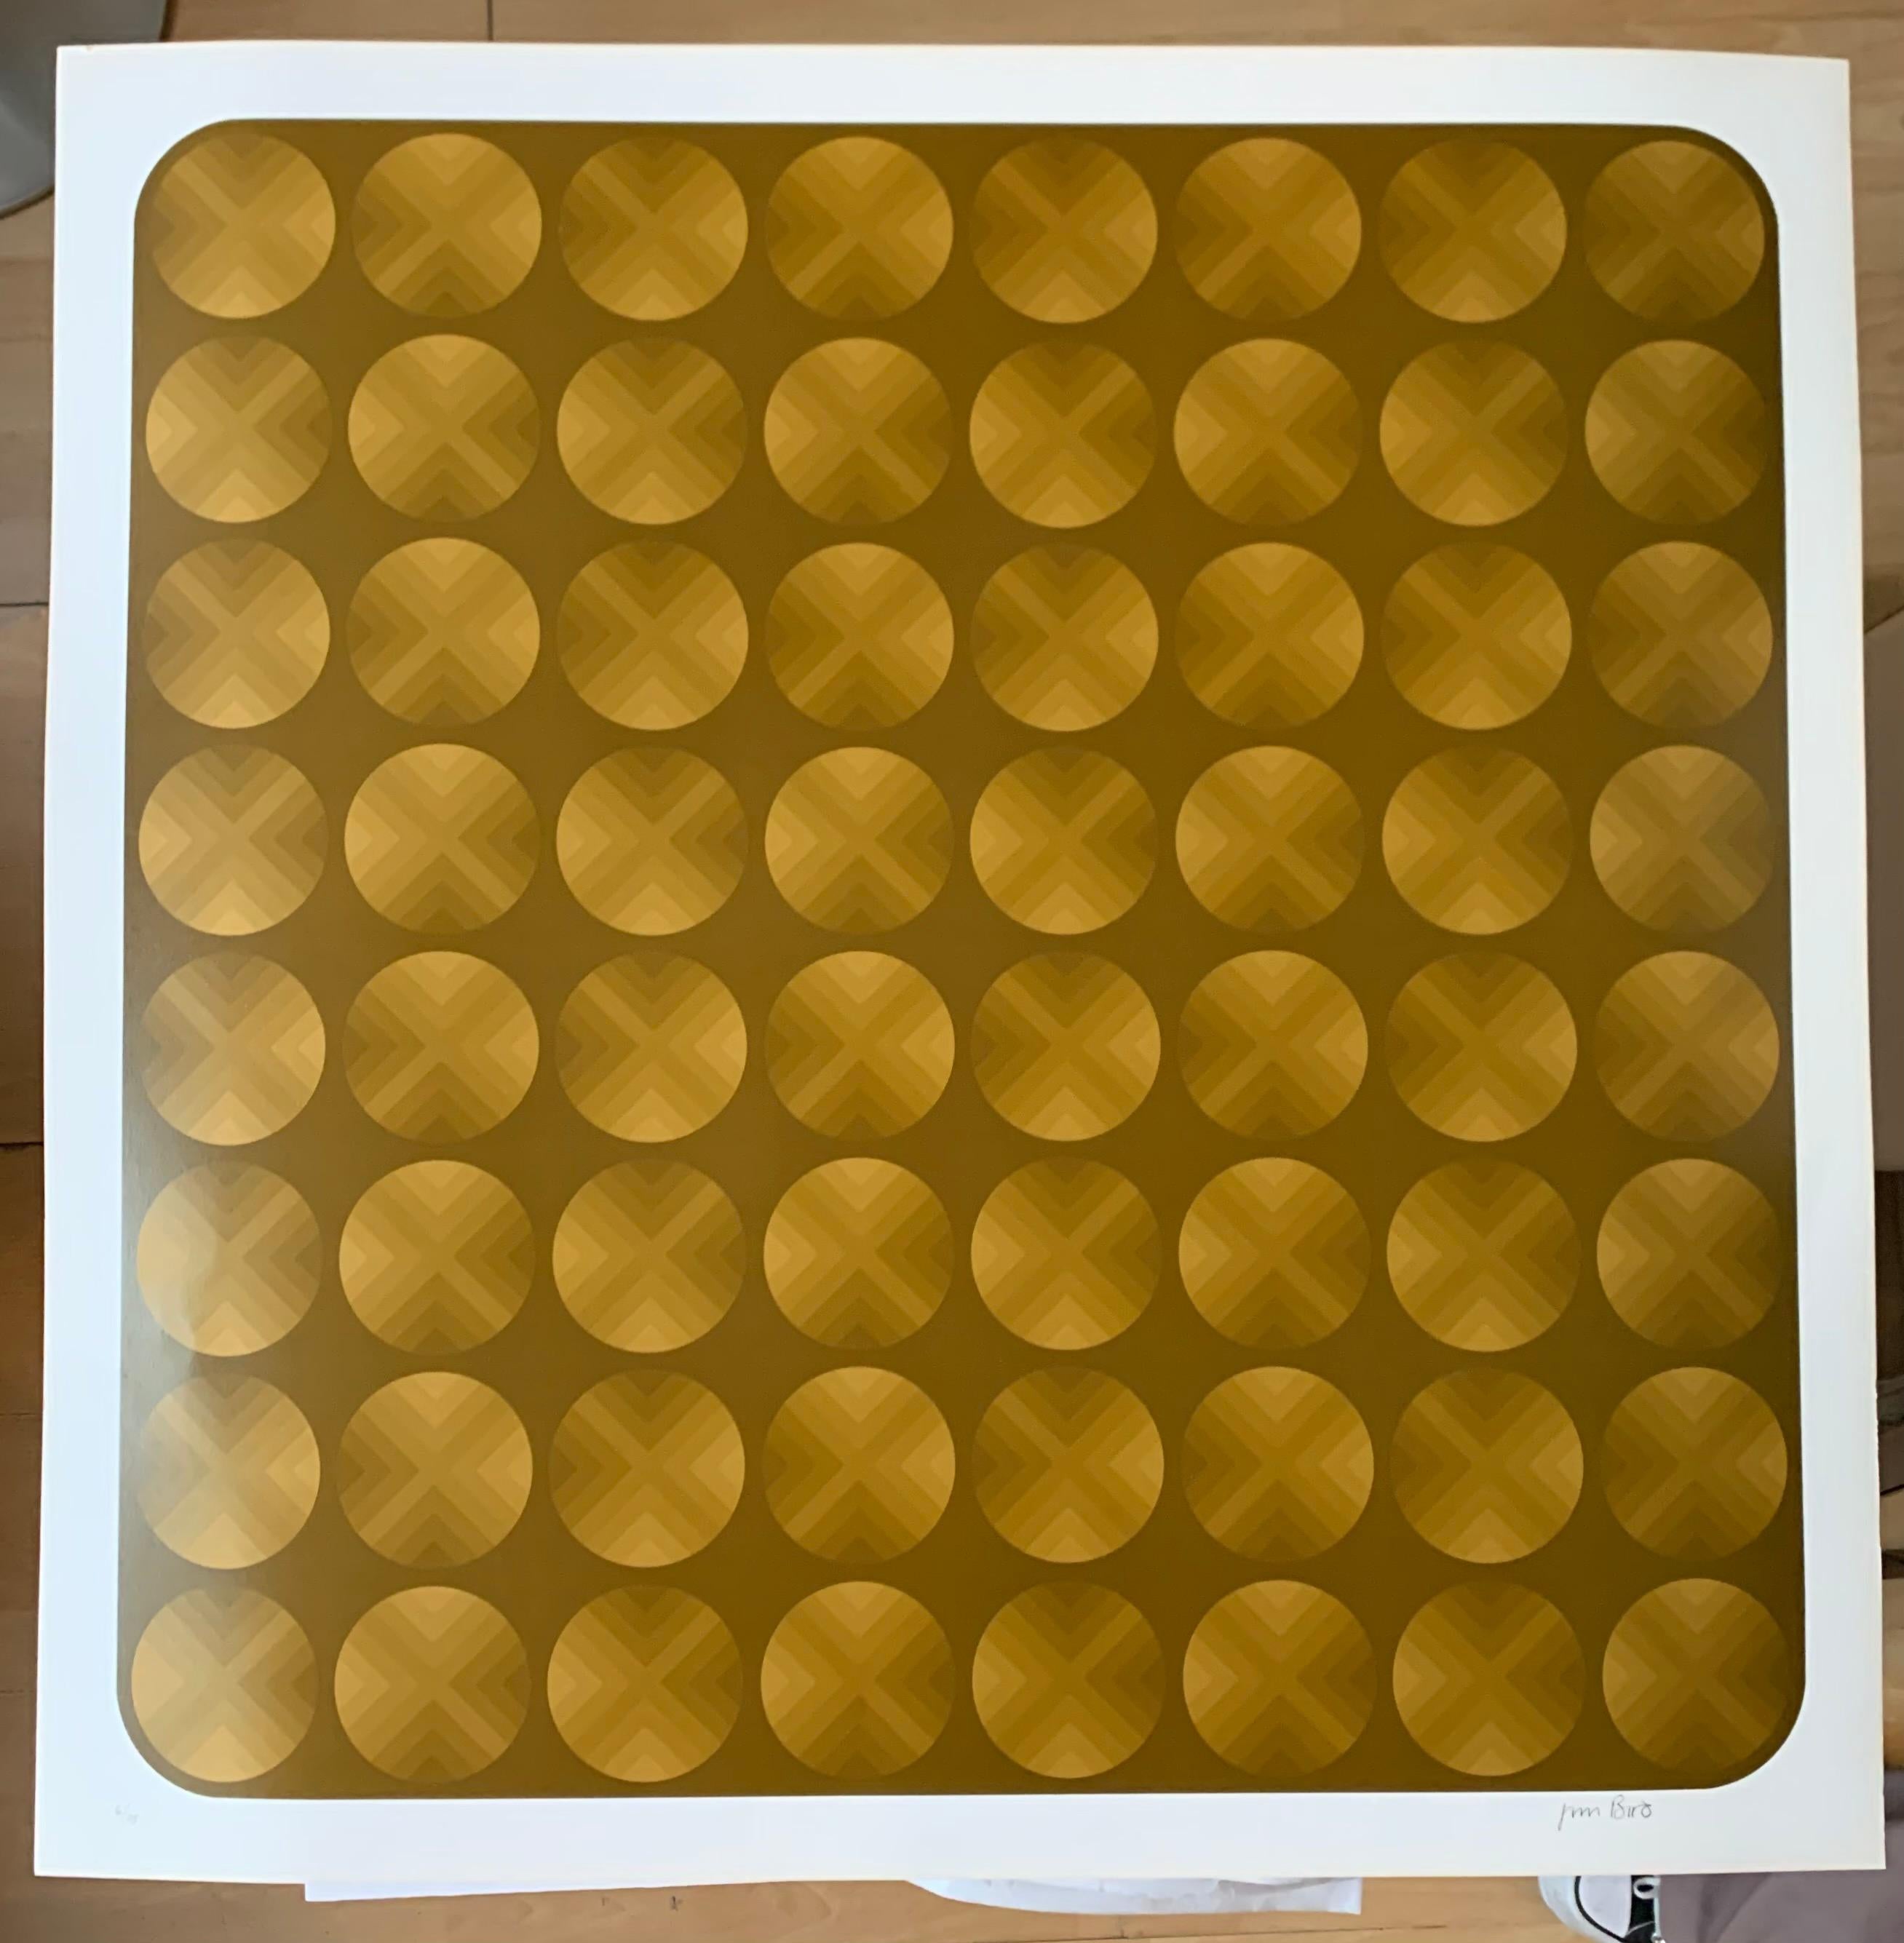 Photolithography
1972
Signed and numbered 6/75
Paper size : 68x68
Image size : 61x61 
Perfect condition 
Published by Poligrafa, Barcelona 
290€